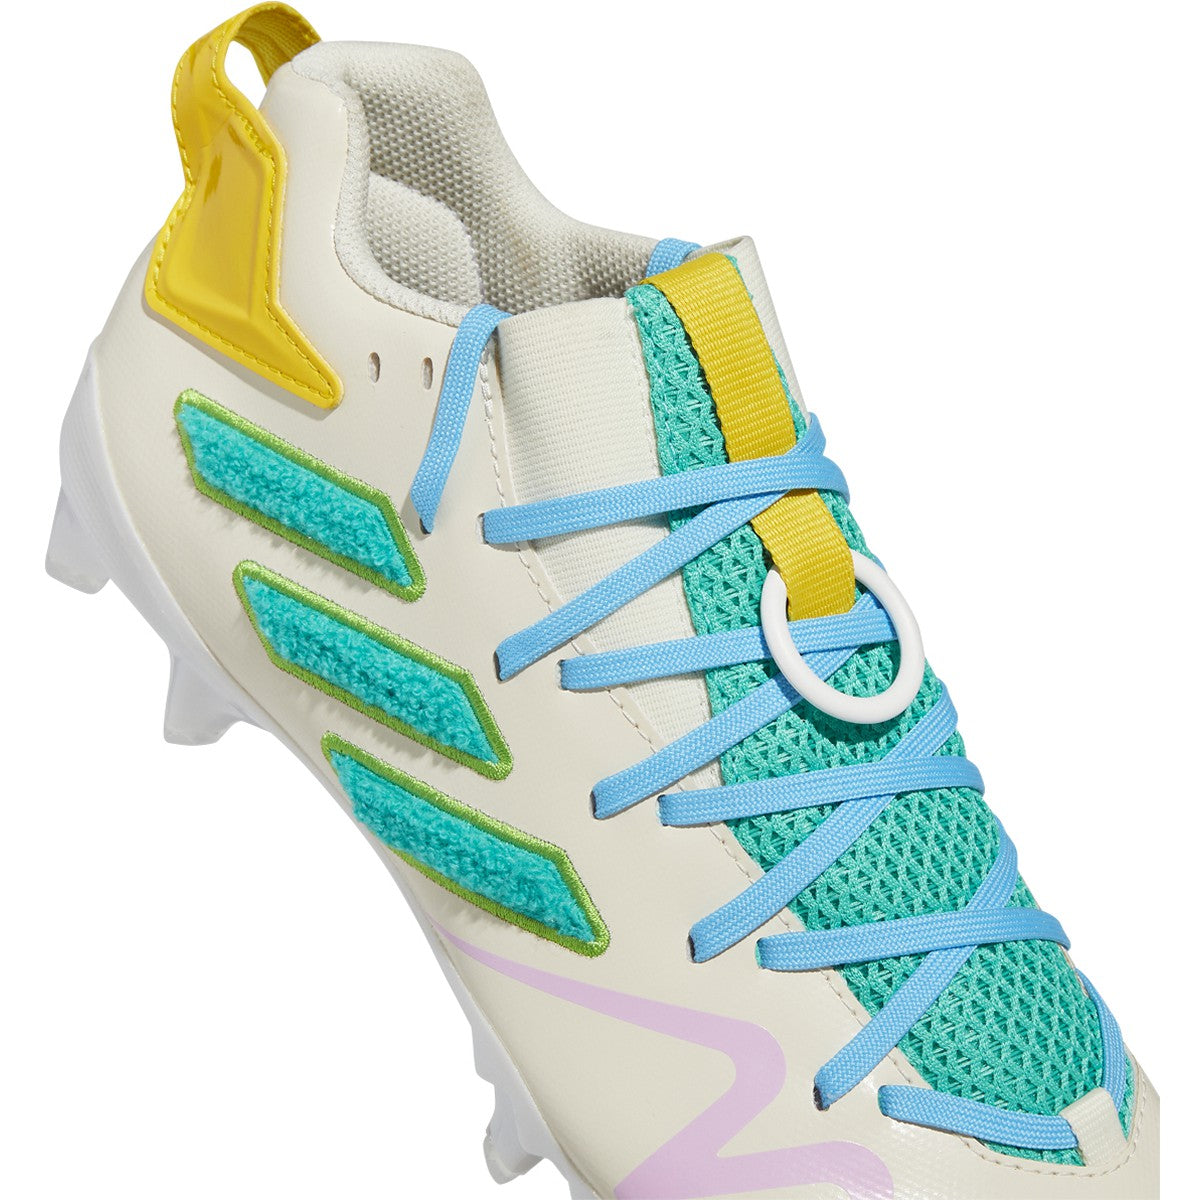 Show your Simpsons love with adidas Freak 22 Cleats!